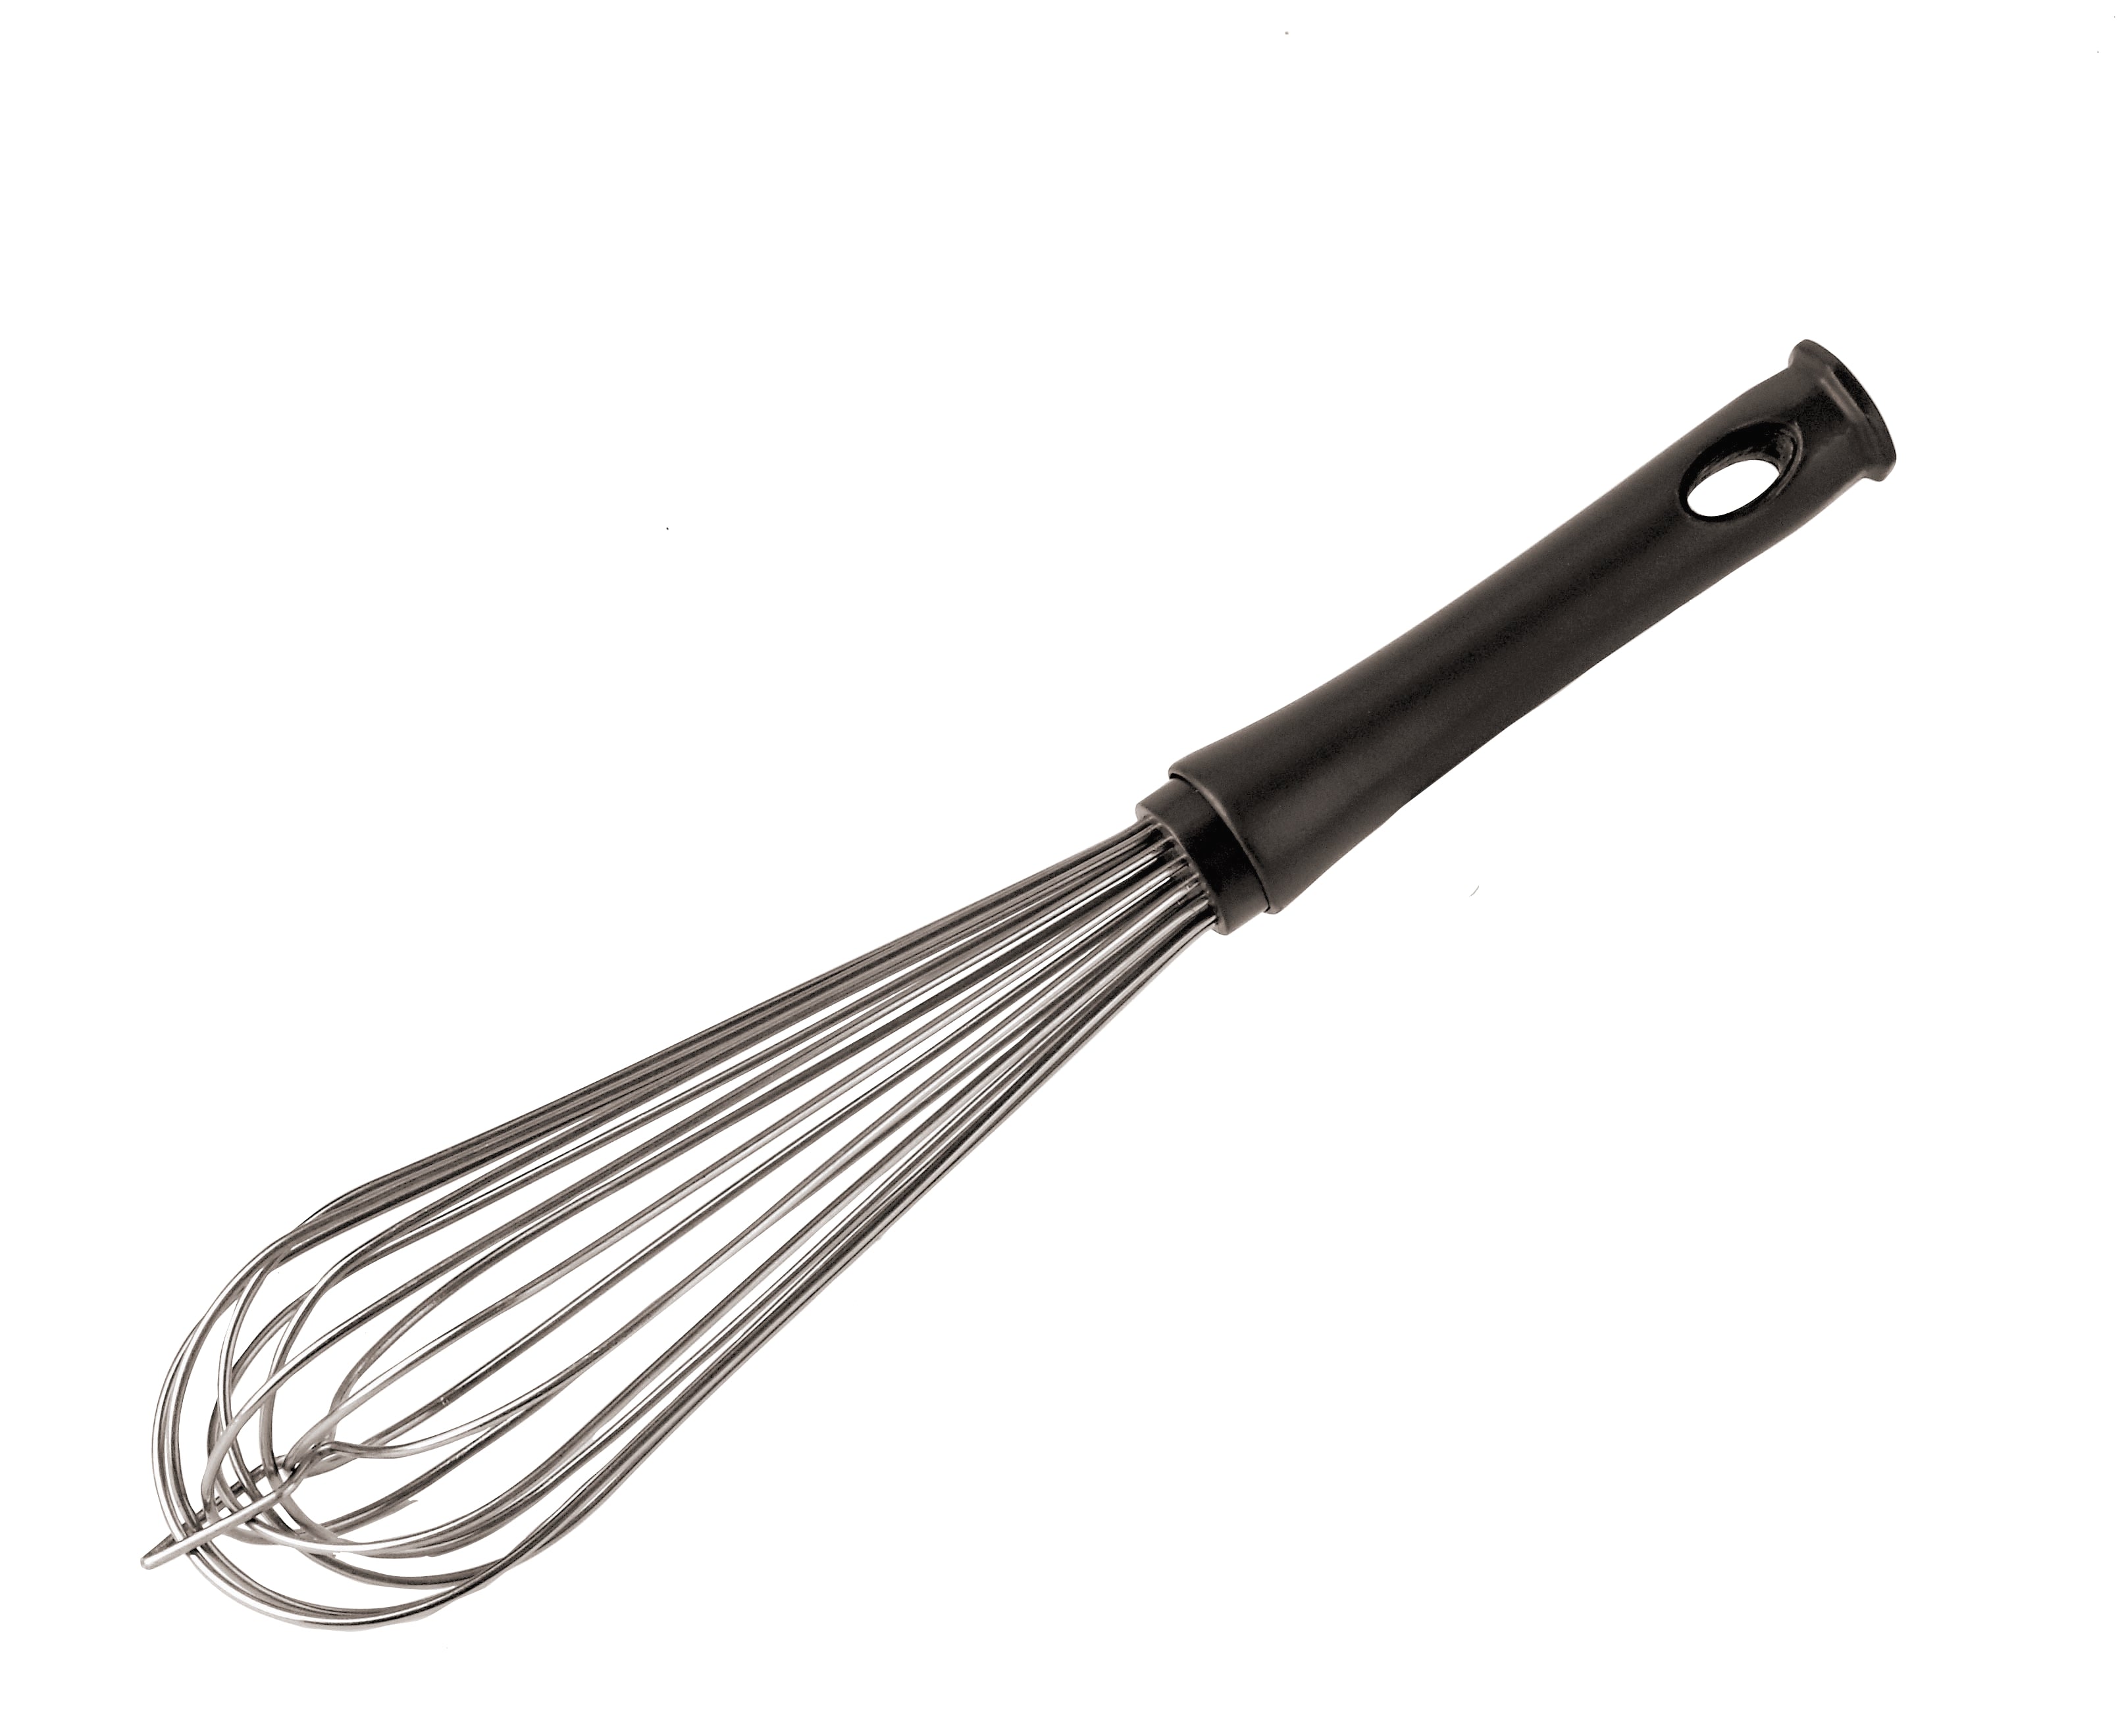 PADERNO WIRE WHISK - Mabrook Hotel Supplies